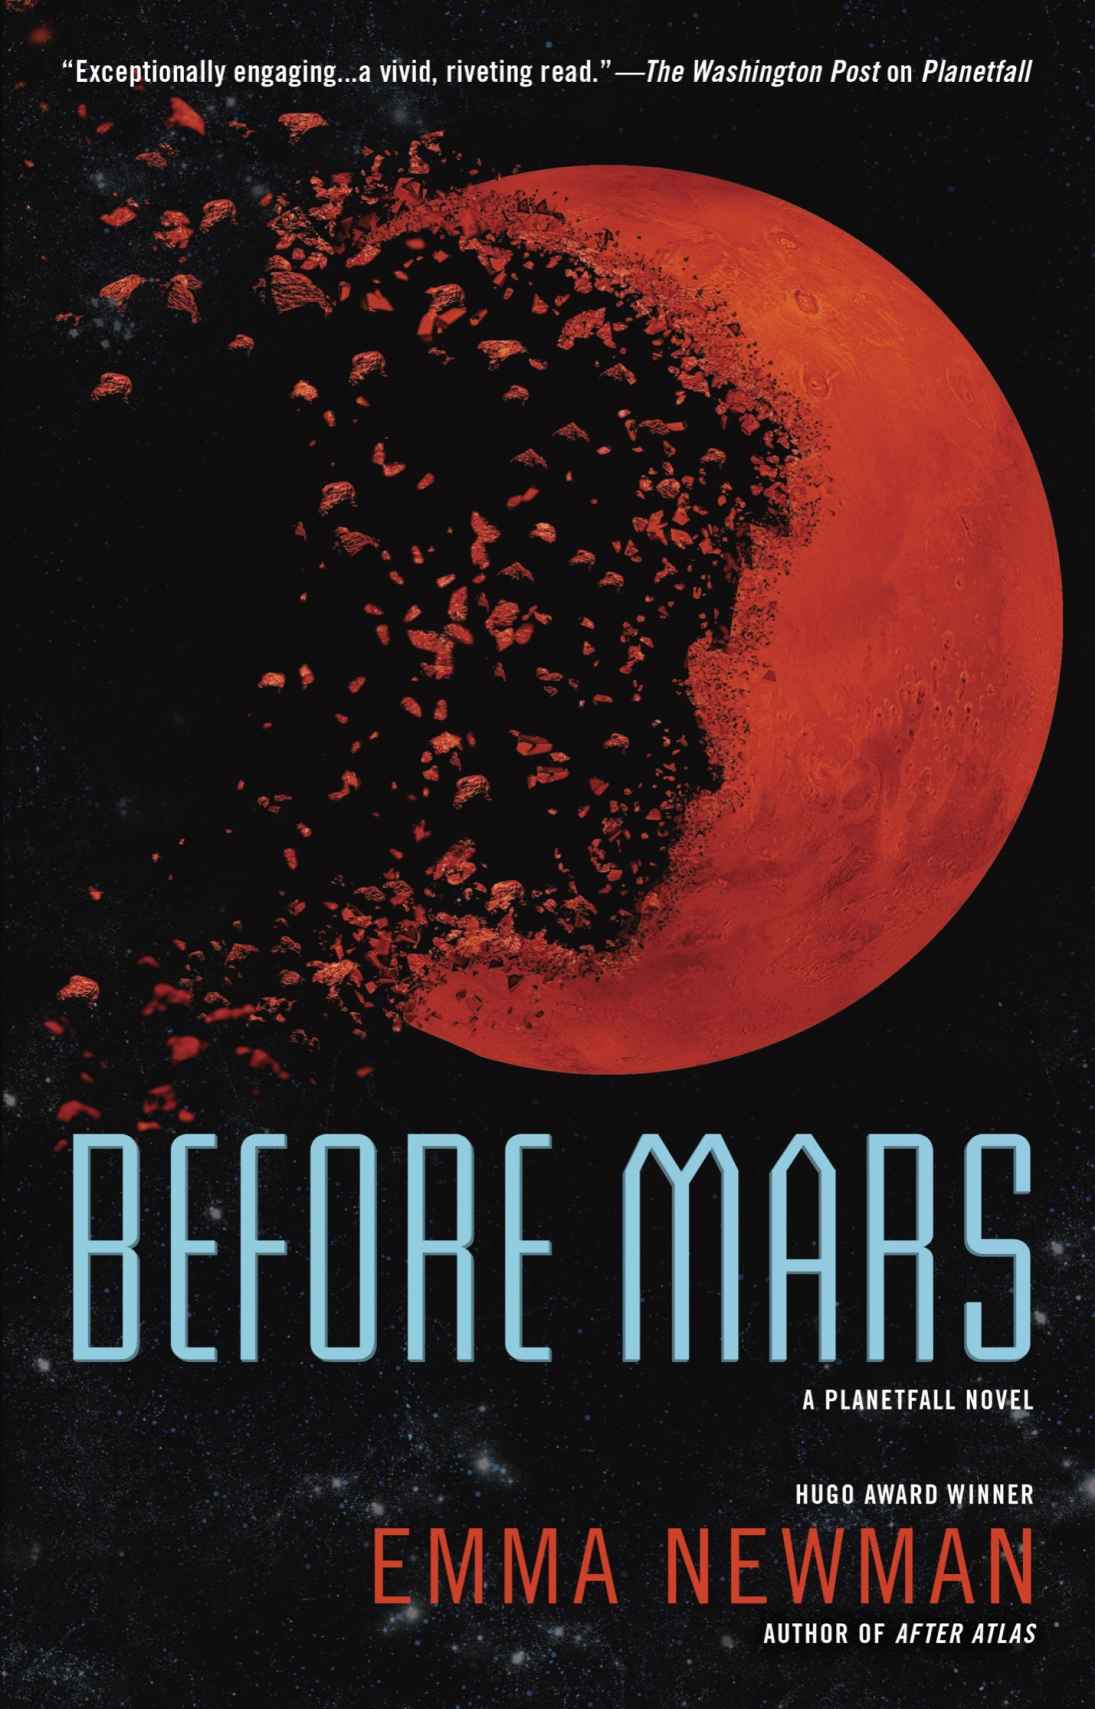 'Before Mars' review: A psychological exploration on a lonely planet